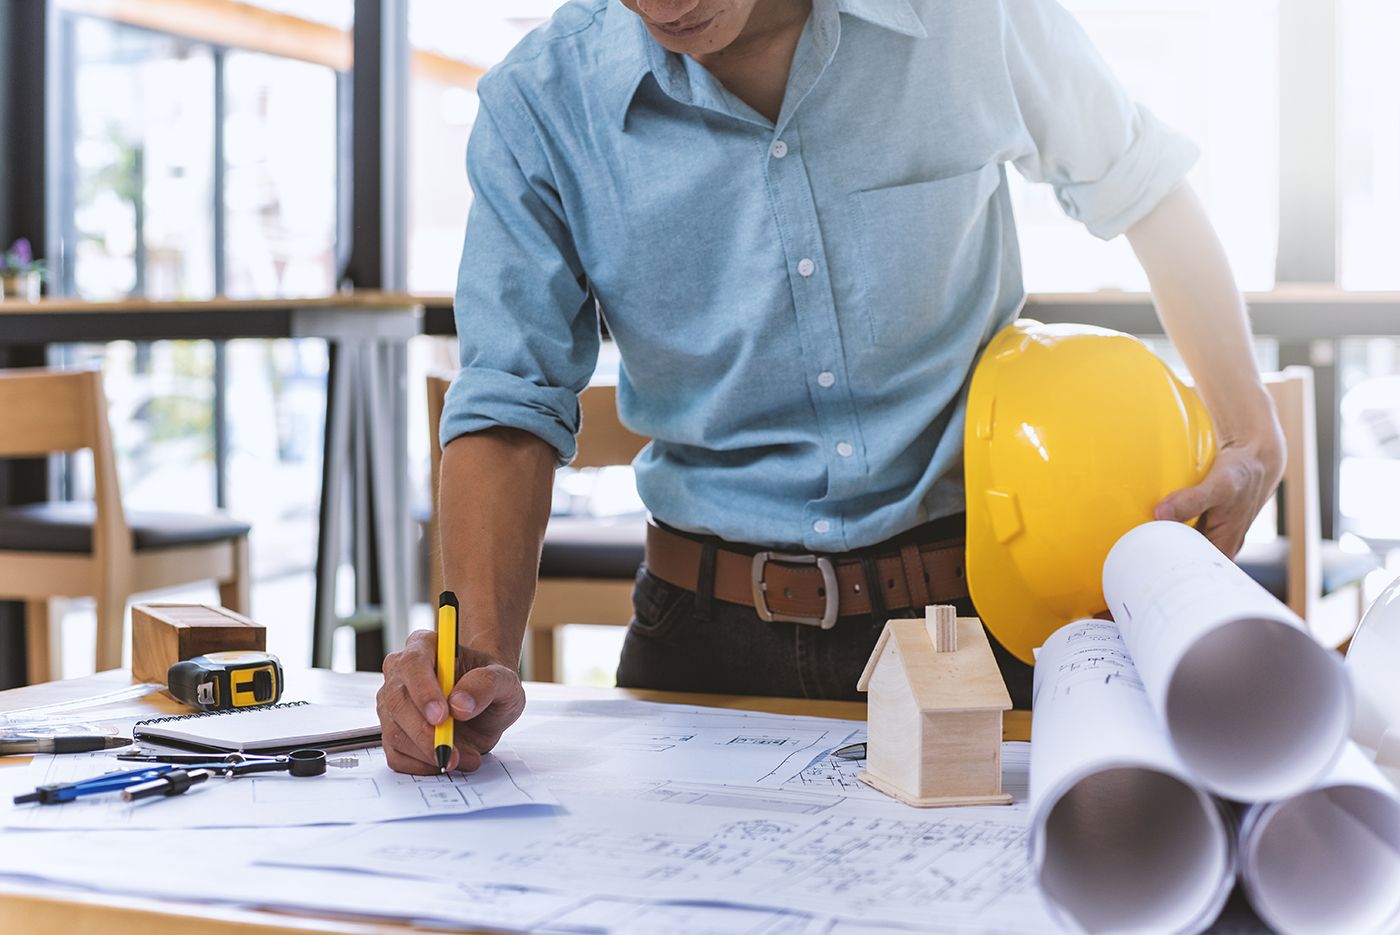 How To Become An Engineering Contractor